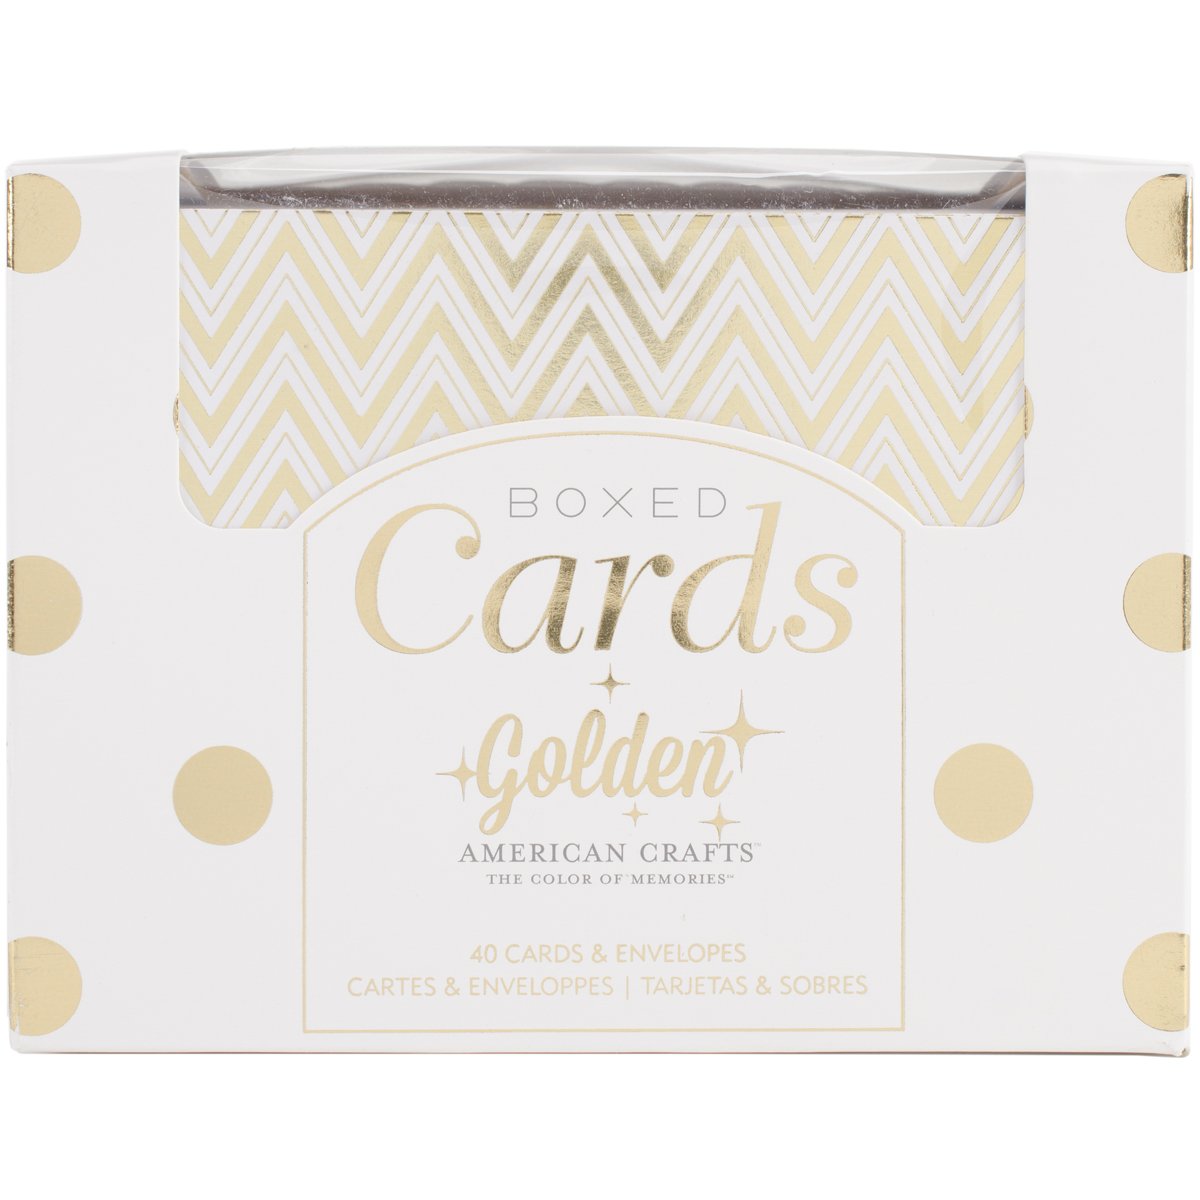 A2 Card & Envelope Golden Box Set (4.24”X5.5”) with Shiny Gold Foil Treatments by American Crafts, 40 Cards And Envelopes Per Box. Perfect for Everyday, Holiday, Special Occasion Card Giving or Thank You Notes